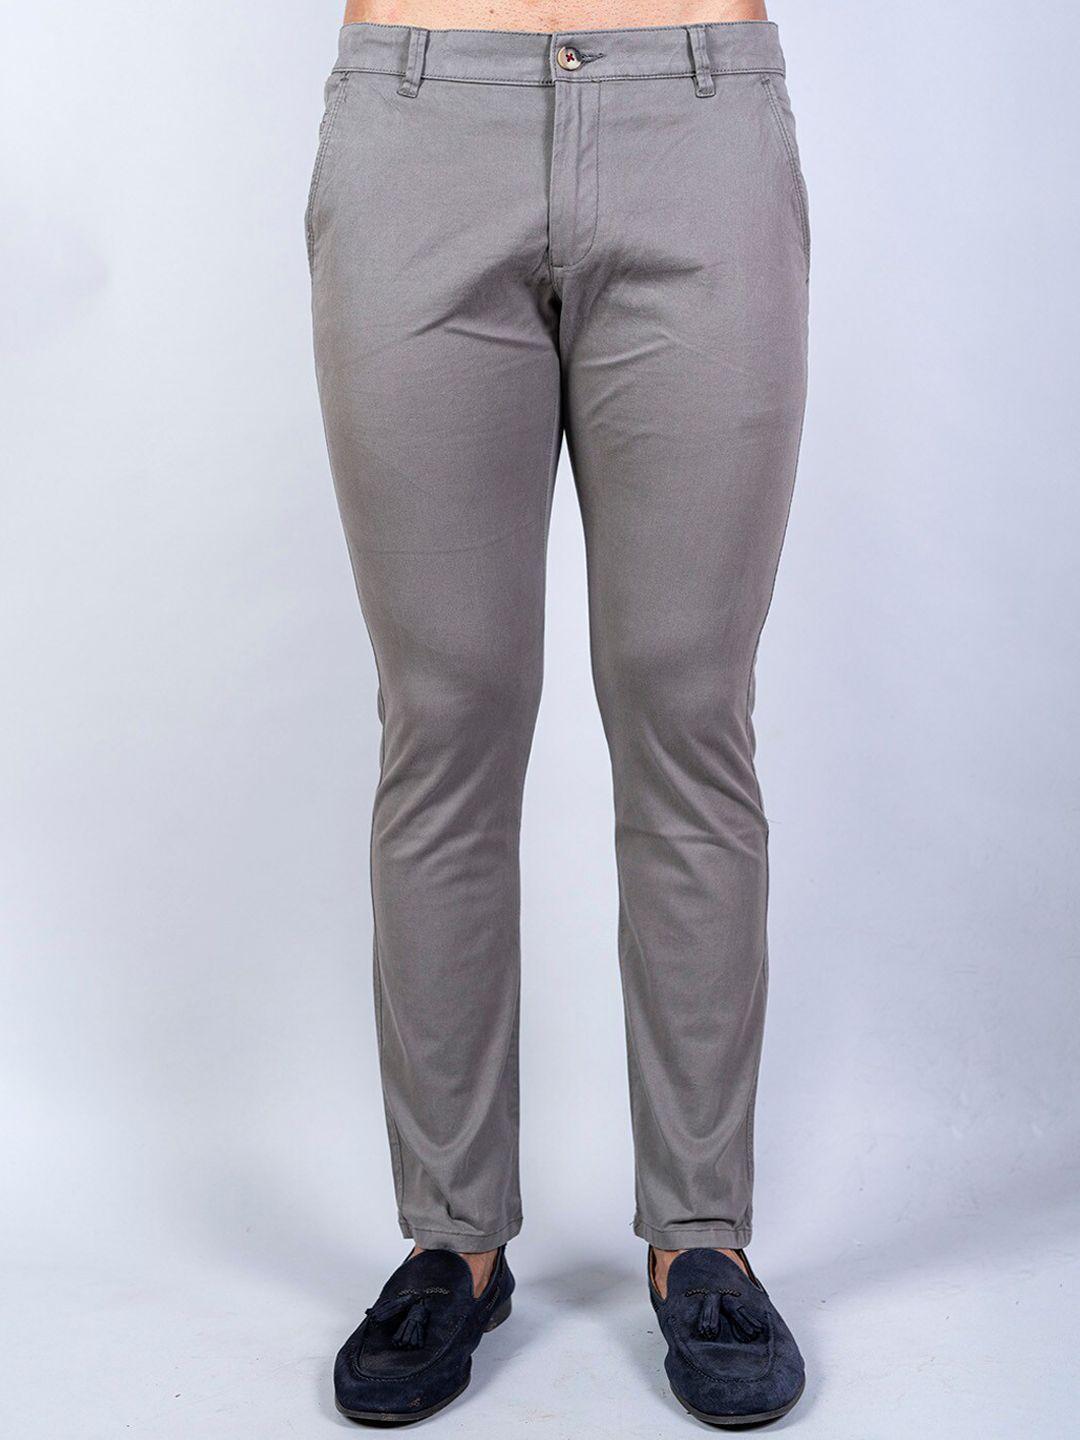 tistabene men grey relaxed cotton chinos trouser